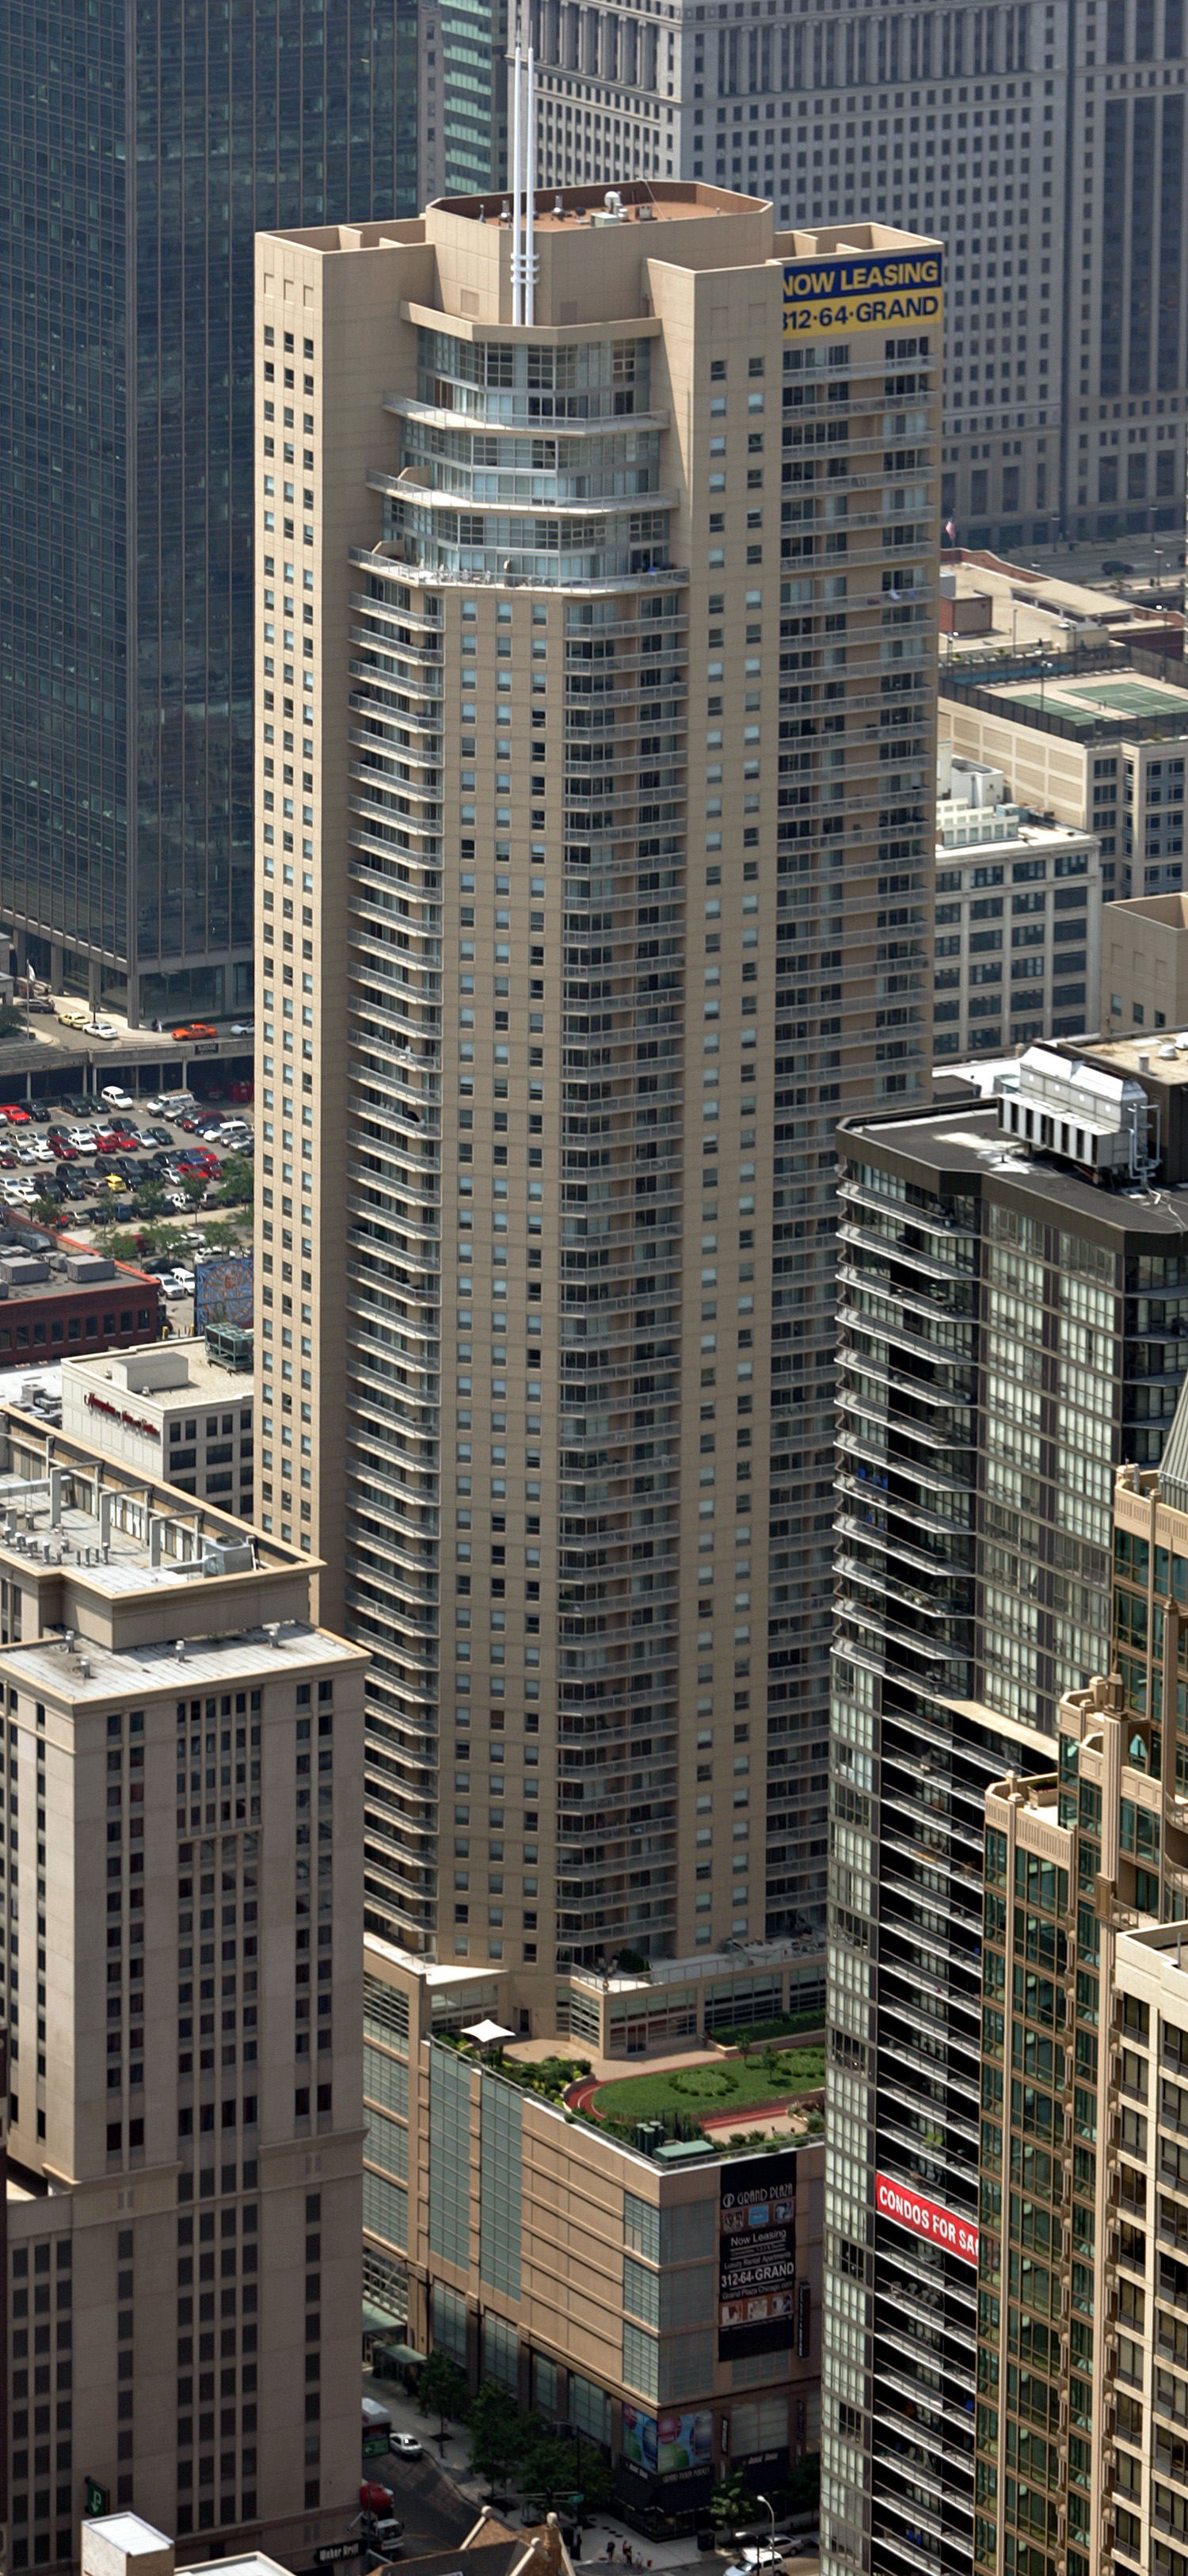 Grand Plaza Apartments, Chicago - View from John Hancock Center. © Mathias Beinling